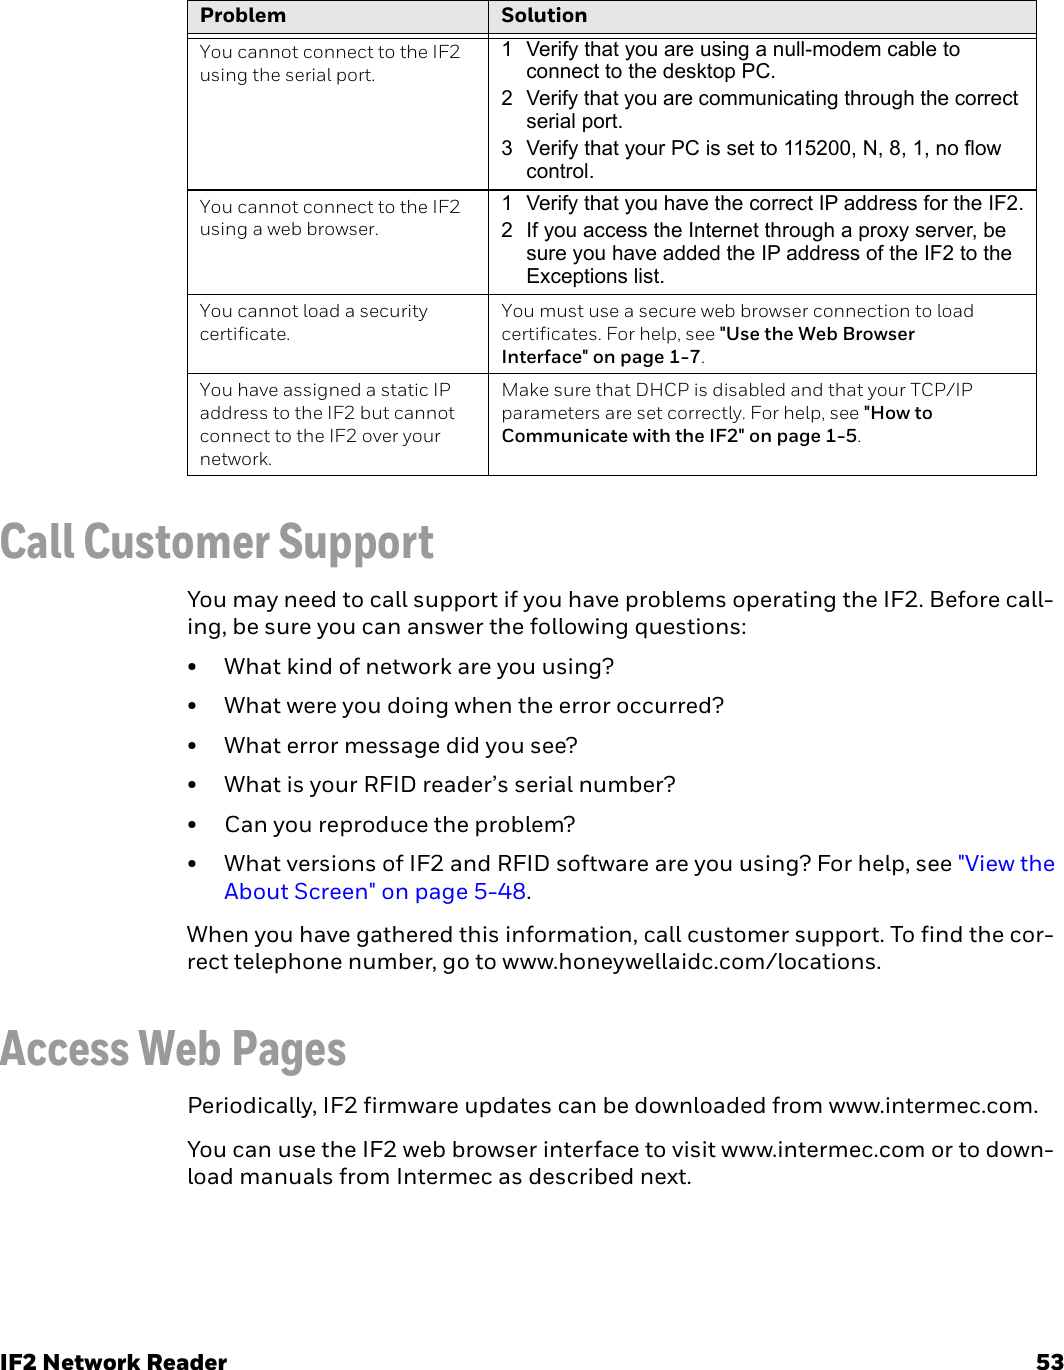 IF2 Network Reader 53Connectivity Problems and Solutions Call Customer SupportYou may need to call support if you have problems operating the IF2. Before call-ing, be sure you can answer the following questions:• What kind of network are you using?• What were you doing when the error occurred?• What error message did you see?• What is your RFID reader’s serial number?• Can you reproduce the problem?• What versions of IF2 and RFID software are you using? For help, see &quot;View the About Screen&quot; on page 5-48.When you have gathered this information, call customer support. To find the cor-rect telephone number, go to www.honeywellaidc.com/locations. Access Web PagesPeriodically, IF2 firmware updates can be downloaded from www.intermec.com.You can use the IF2 web browser interface to visit www.intermec.com or to down-load manuals from Intermec as described next.Problem SolutionYou cannot connect to the IF2 using the serial port.1 Verify that you are using a null-modem cable to connect to the desktop PC.2 Verify that you are communicating through the correct serial port.3 Verify that your PC is set to 115200, N, 8, 1, no flow control.You cannot connect to the IF2 using a web browser.1 Verify that you have the correct IP address for the IF2.2 If you access the Internet through a proxy server, be sure you have added the IP address of the IF2 to the Exceptions list.You cannot load a security certificate.You must use a secure web browser connection to load certificates. For help, see &quot;Use the Web Browser Interface&quot; on page 1-7.You have assigned a static IP address to the IF2 but cannot connect to the IF2 over your network.Make sure that DHCP is disabled and that your TCP/IP parameters are set correctly. For help, see &quot;How to Communicate with the IF2&quot; on page 1-5.